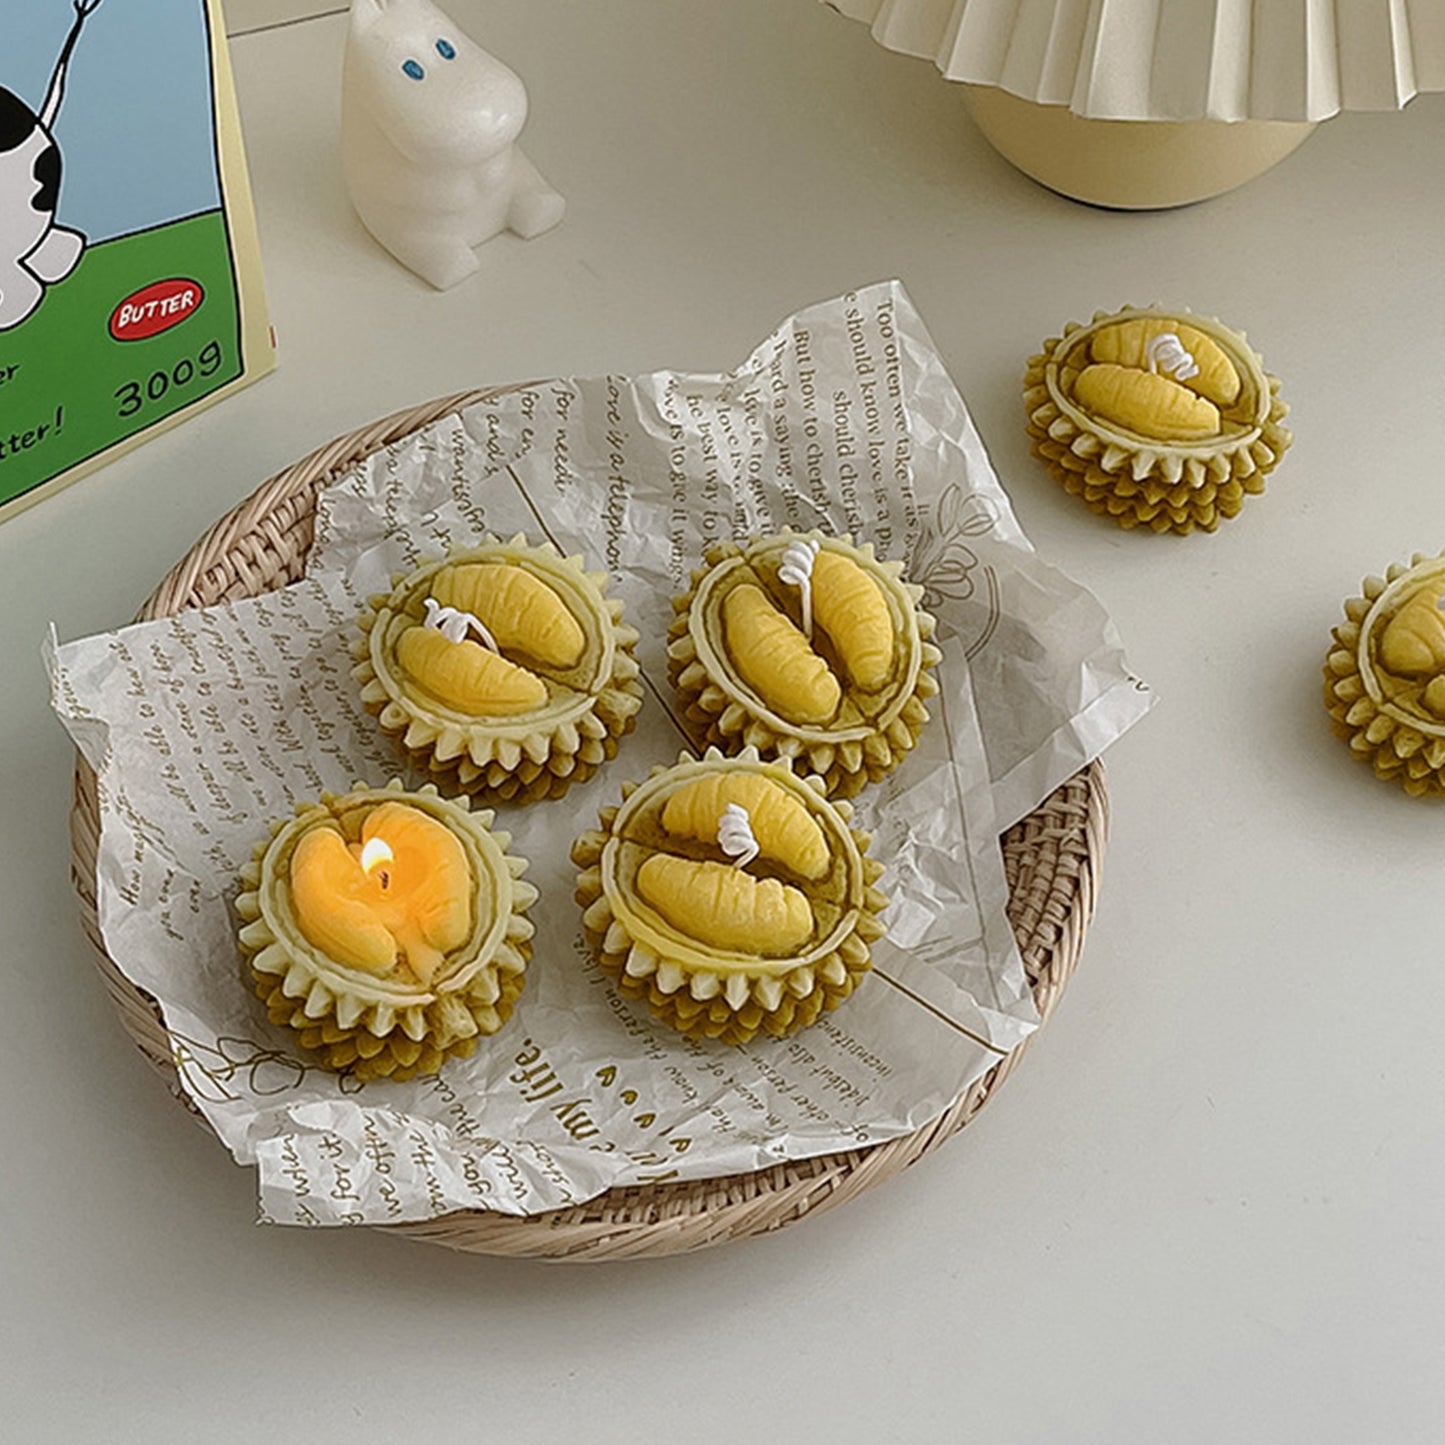 Fun Durian Fruit Scented Candle